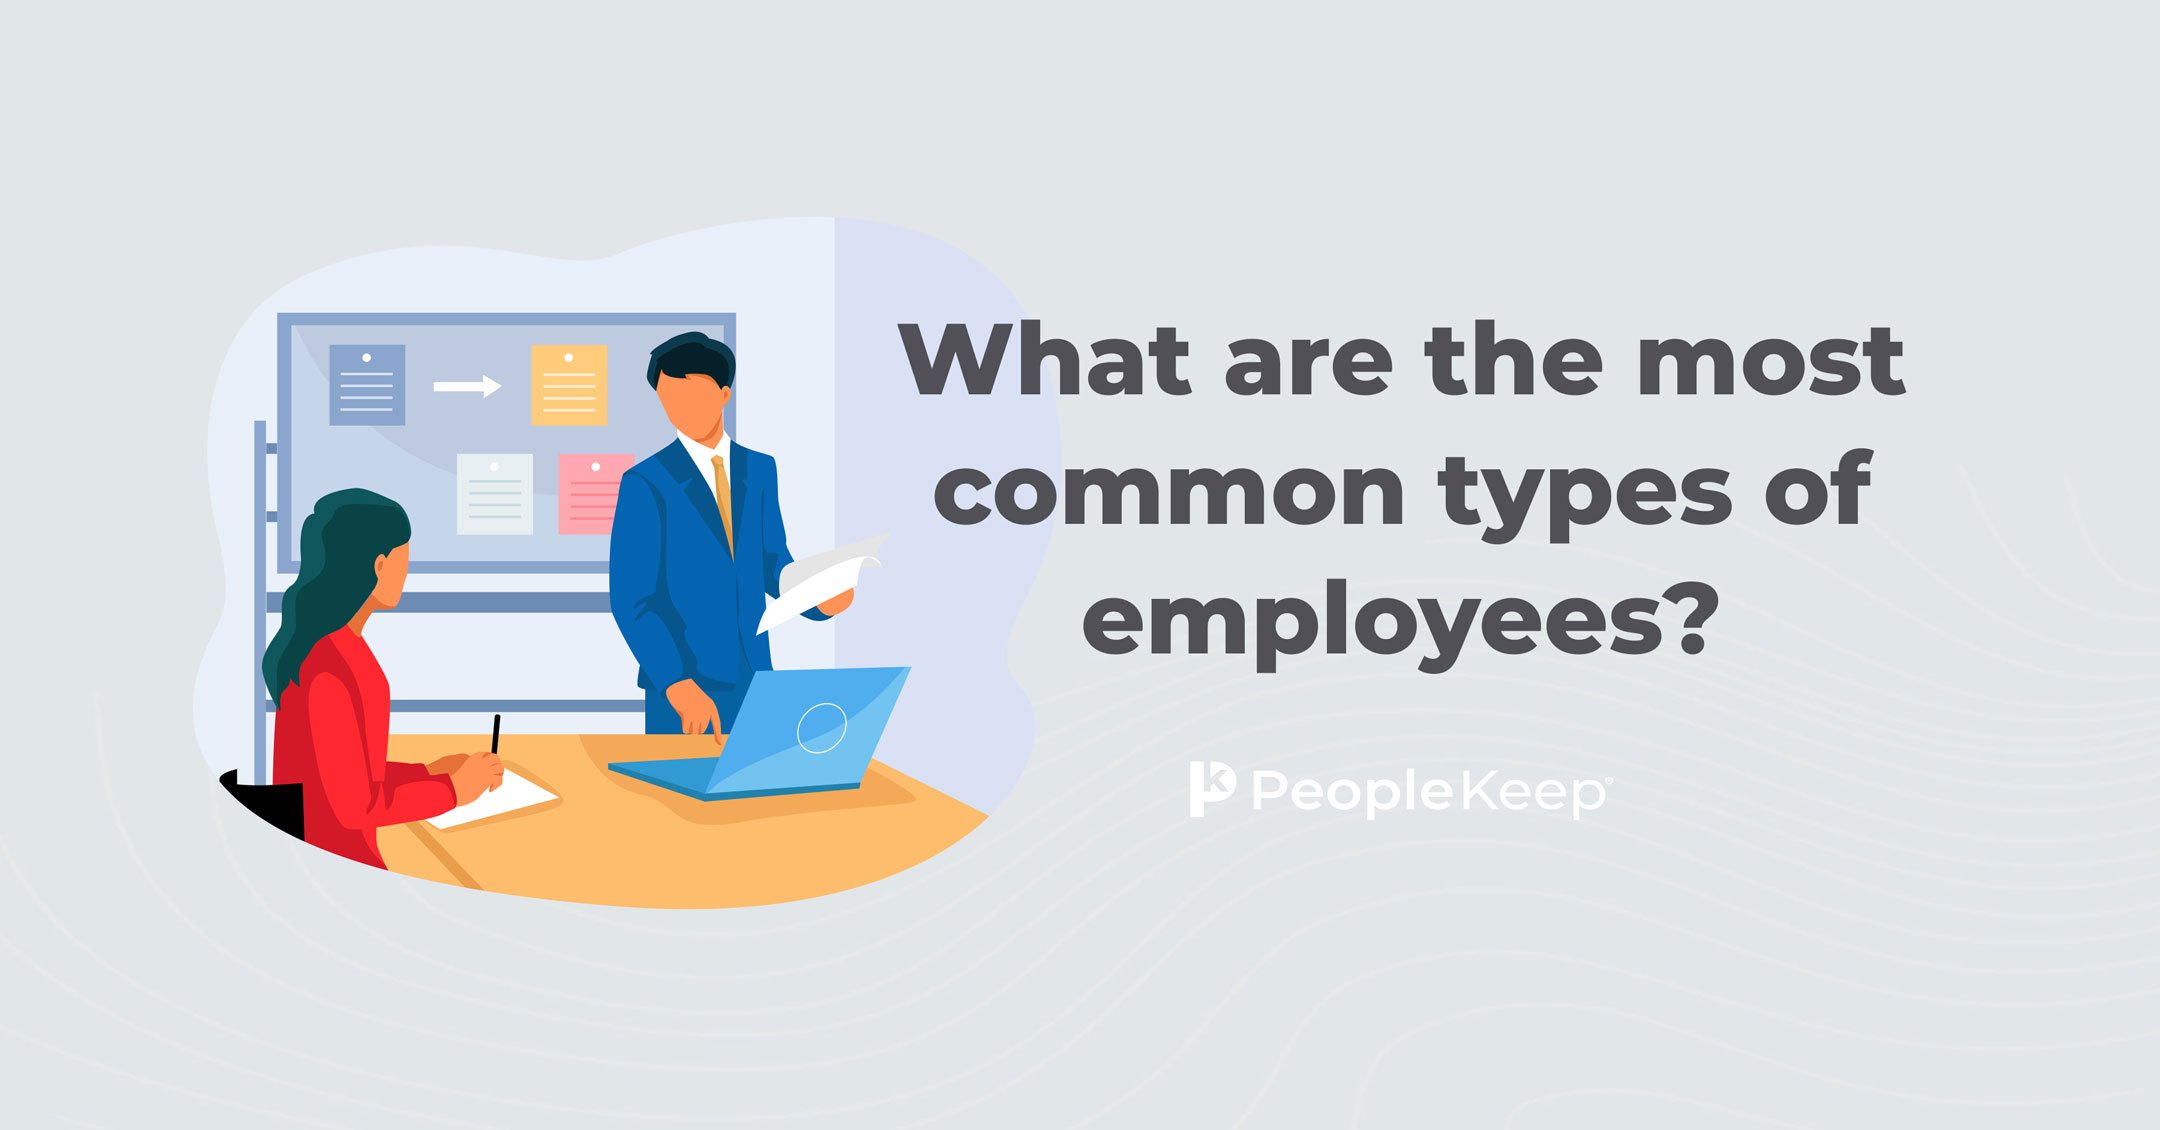 What are the most common types of employees?